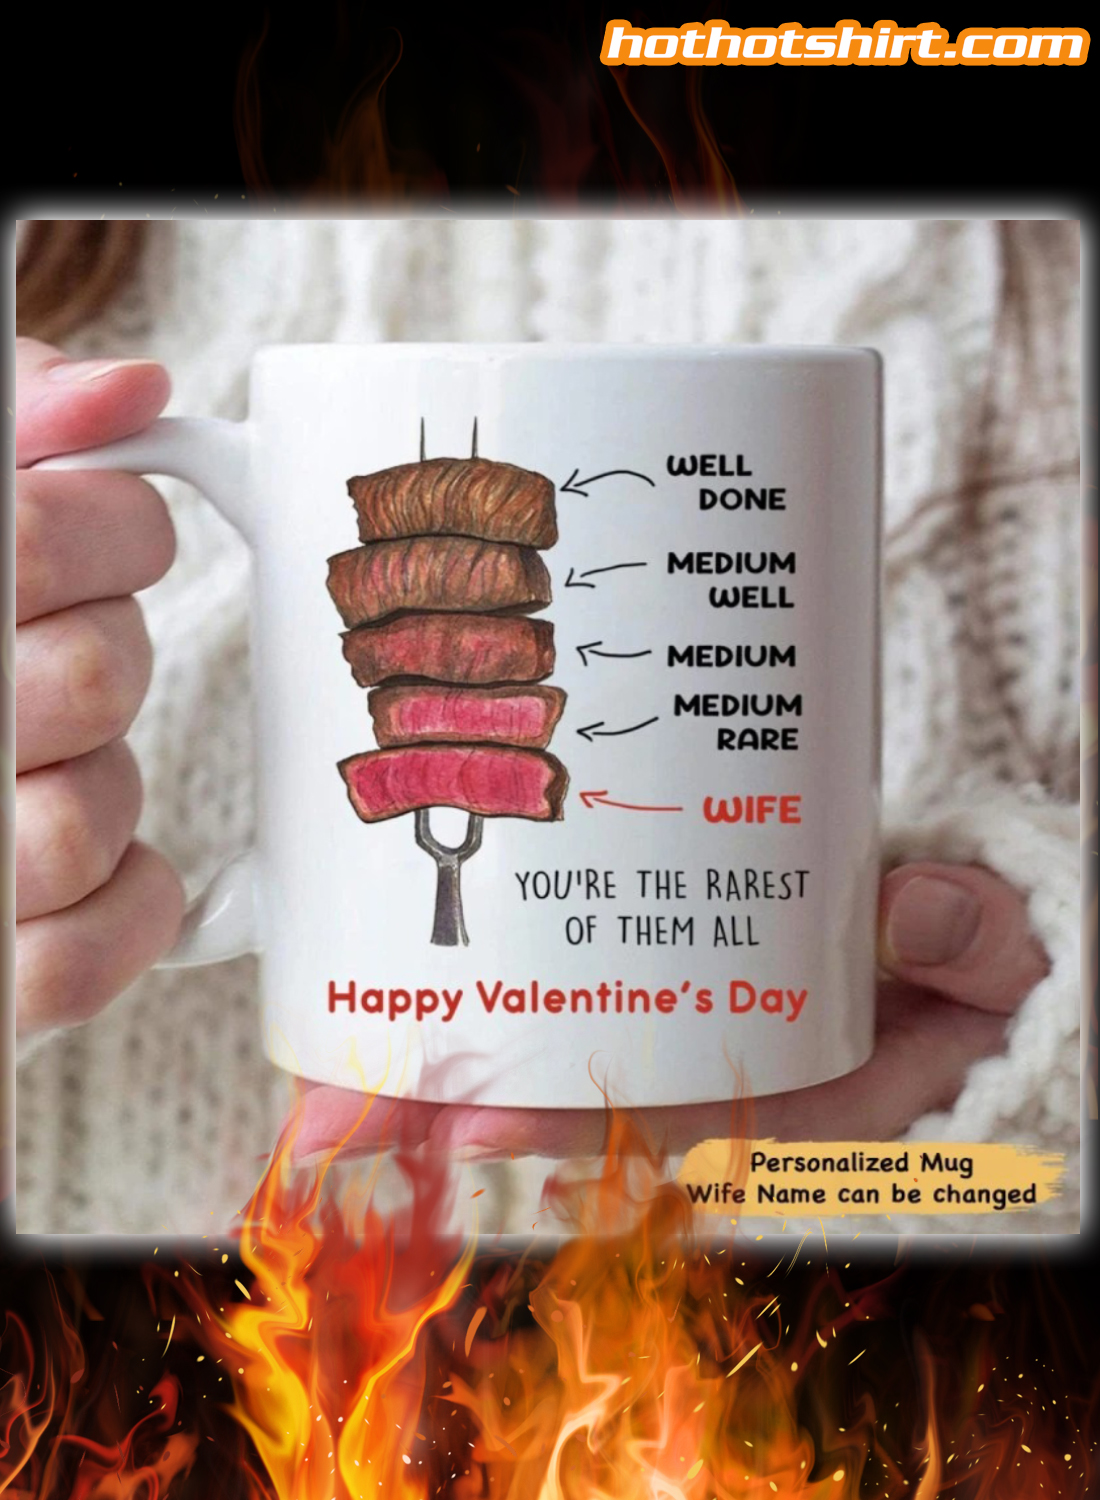 Personalized wife you're the rarest of them all happy valentine's day mug 3